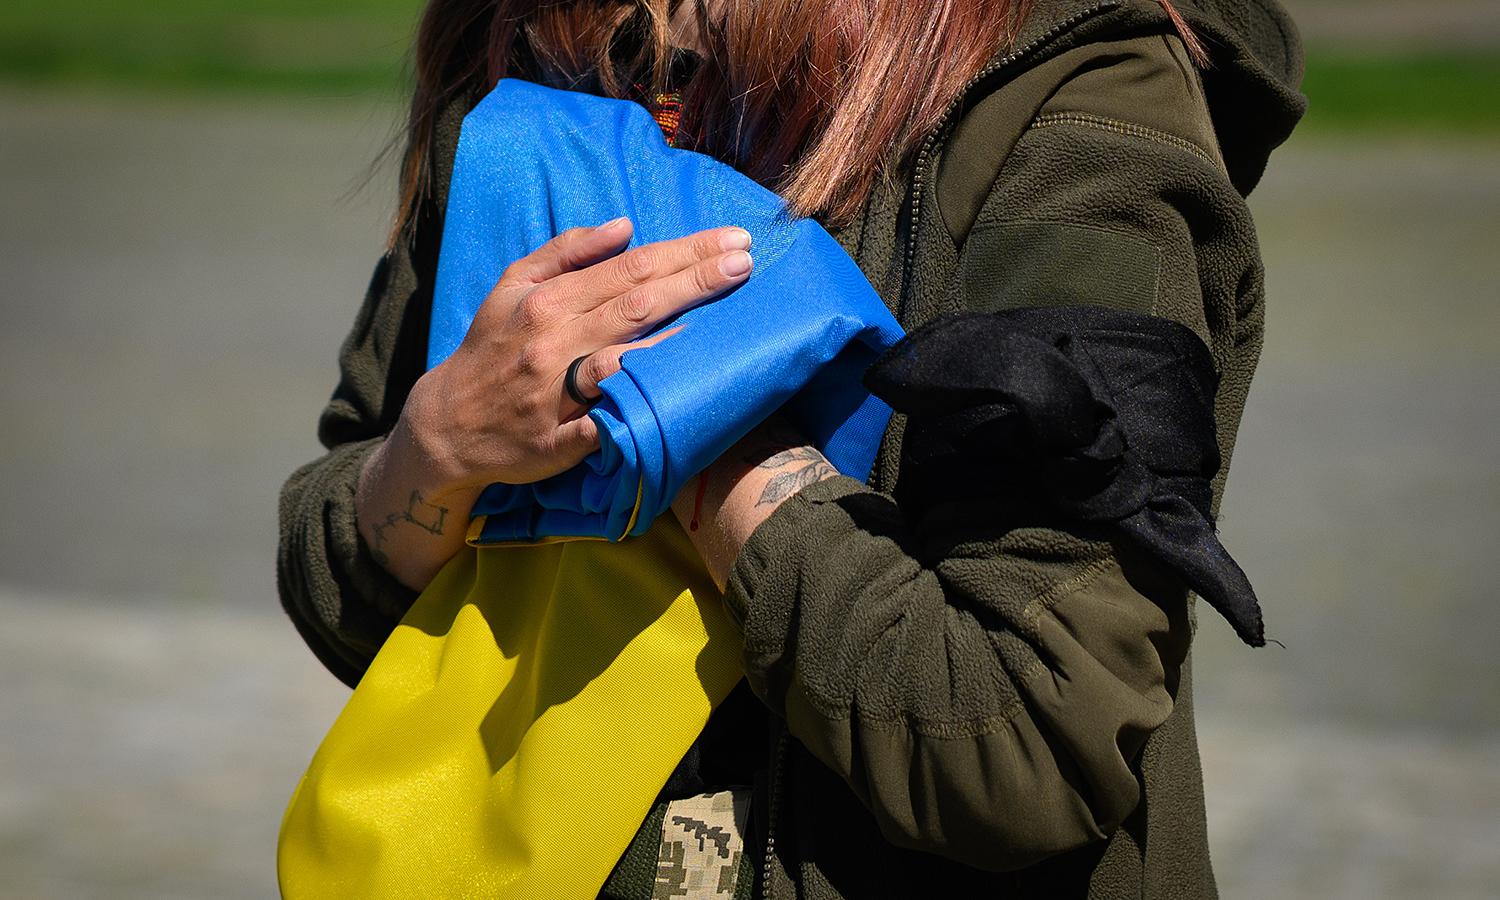 The U.S., U.K. and E.U. condemned Russia for a February cyberattack on the Viasat KA-SAT internet service in Ukraine. Pictured: Vira Moisenko mourns after being handed the Ukrainian flag from the coffin during the funeral of her husband Olexandr Moisenko in the Field of Mars at Lychakiv cemetery on May 10 in Lviv, Ukraine. (Photo by Leon Neal/Getty...